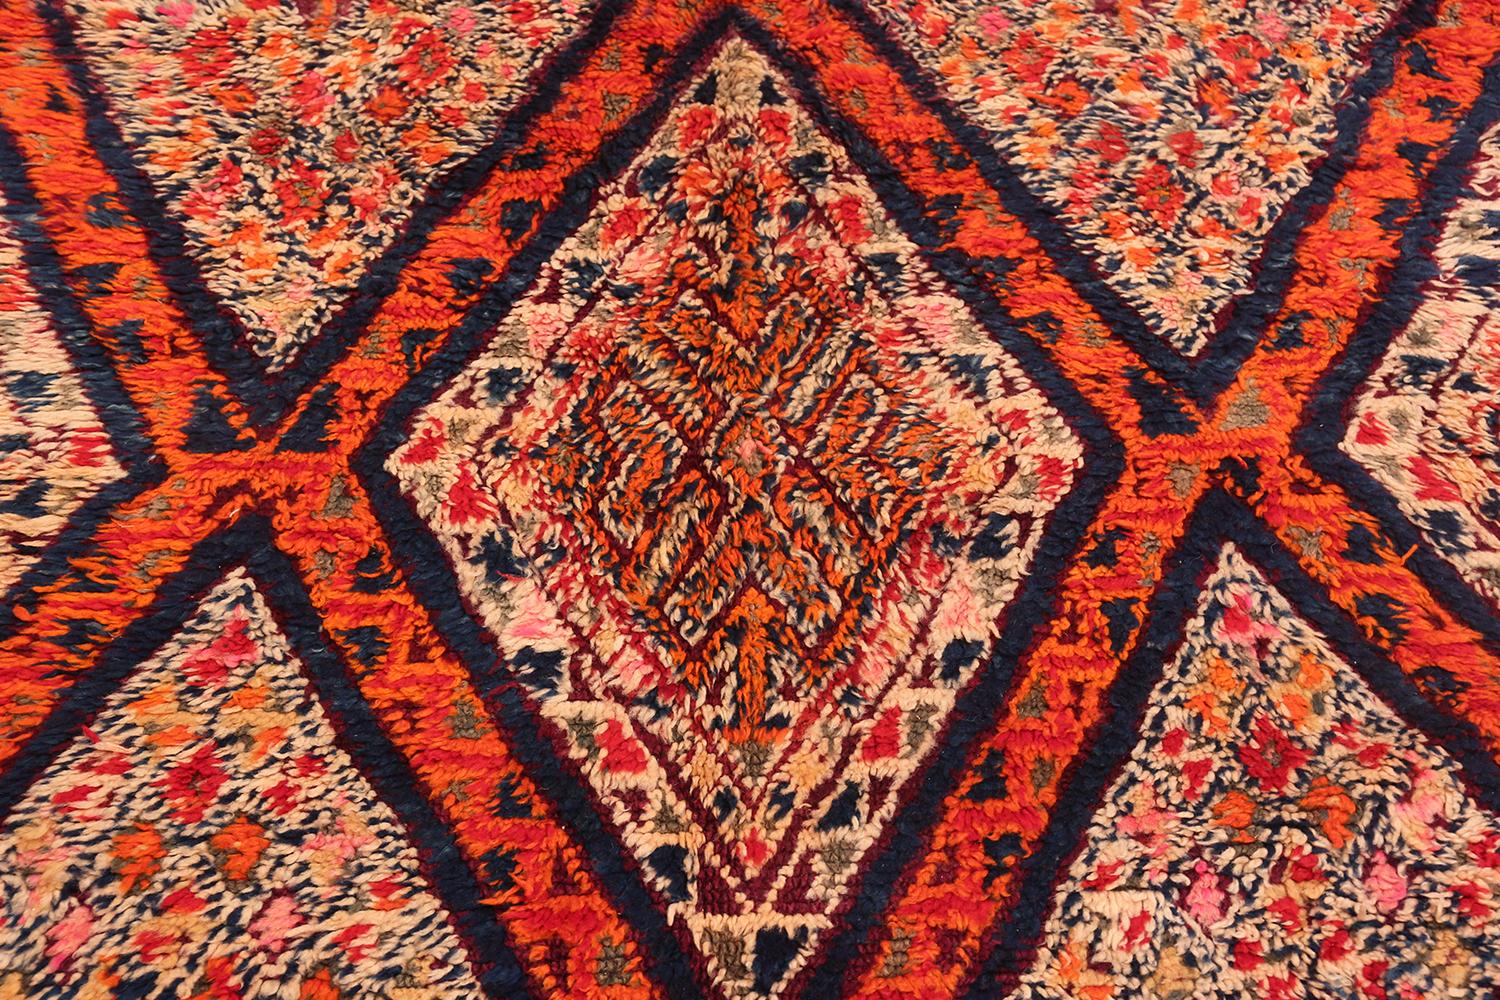 20th Century Folk Art Vintage Geometric Moroccan Rug. Size: 6 ft. 4 in x 9 ft. 9 in